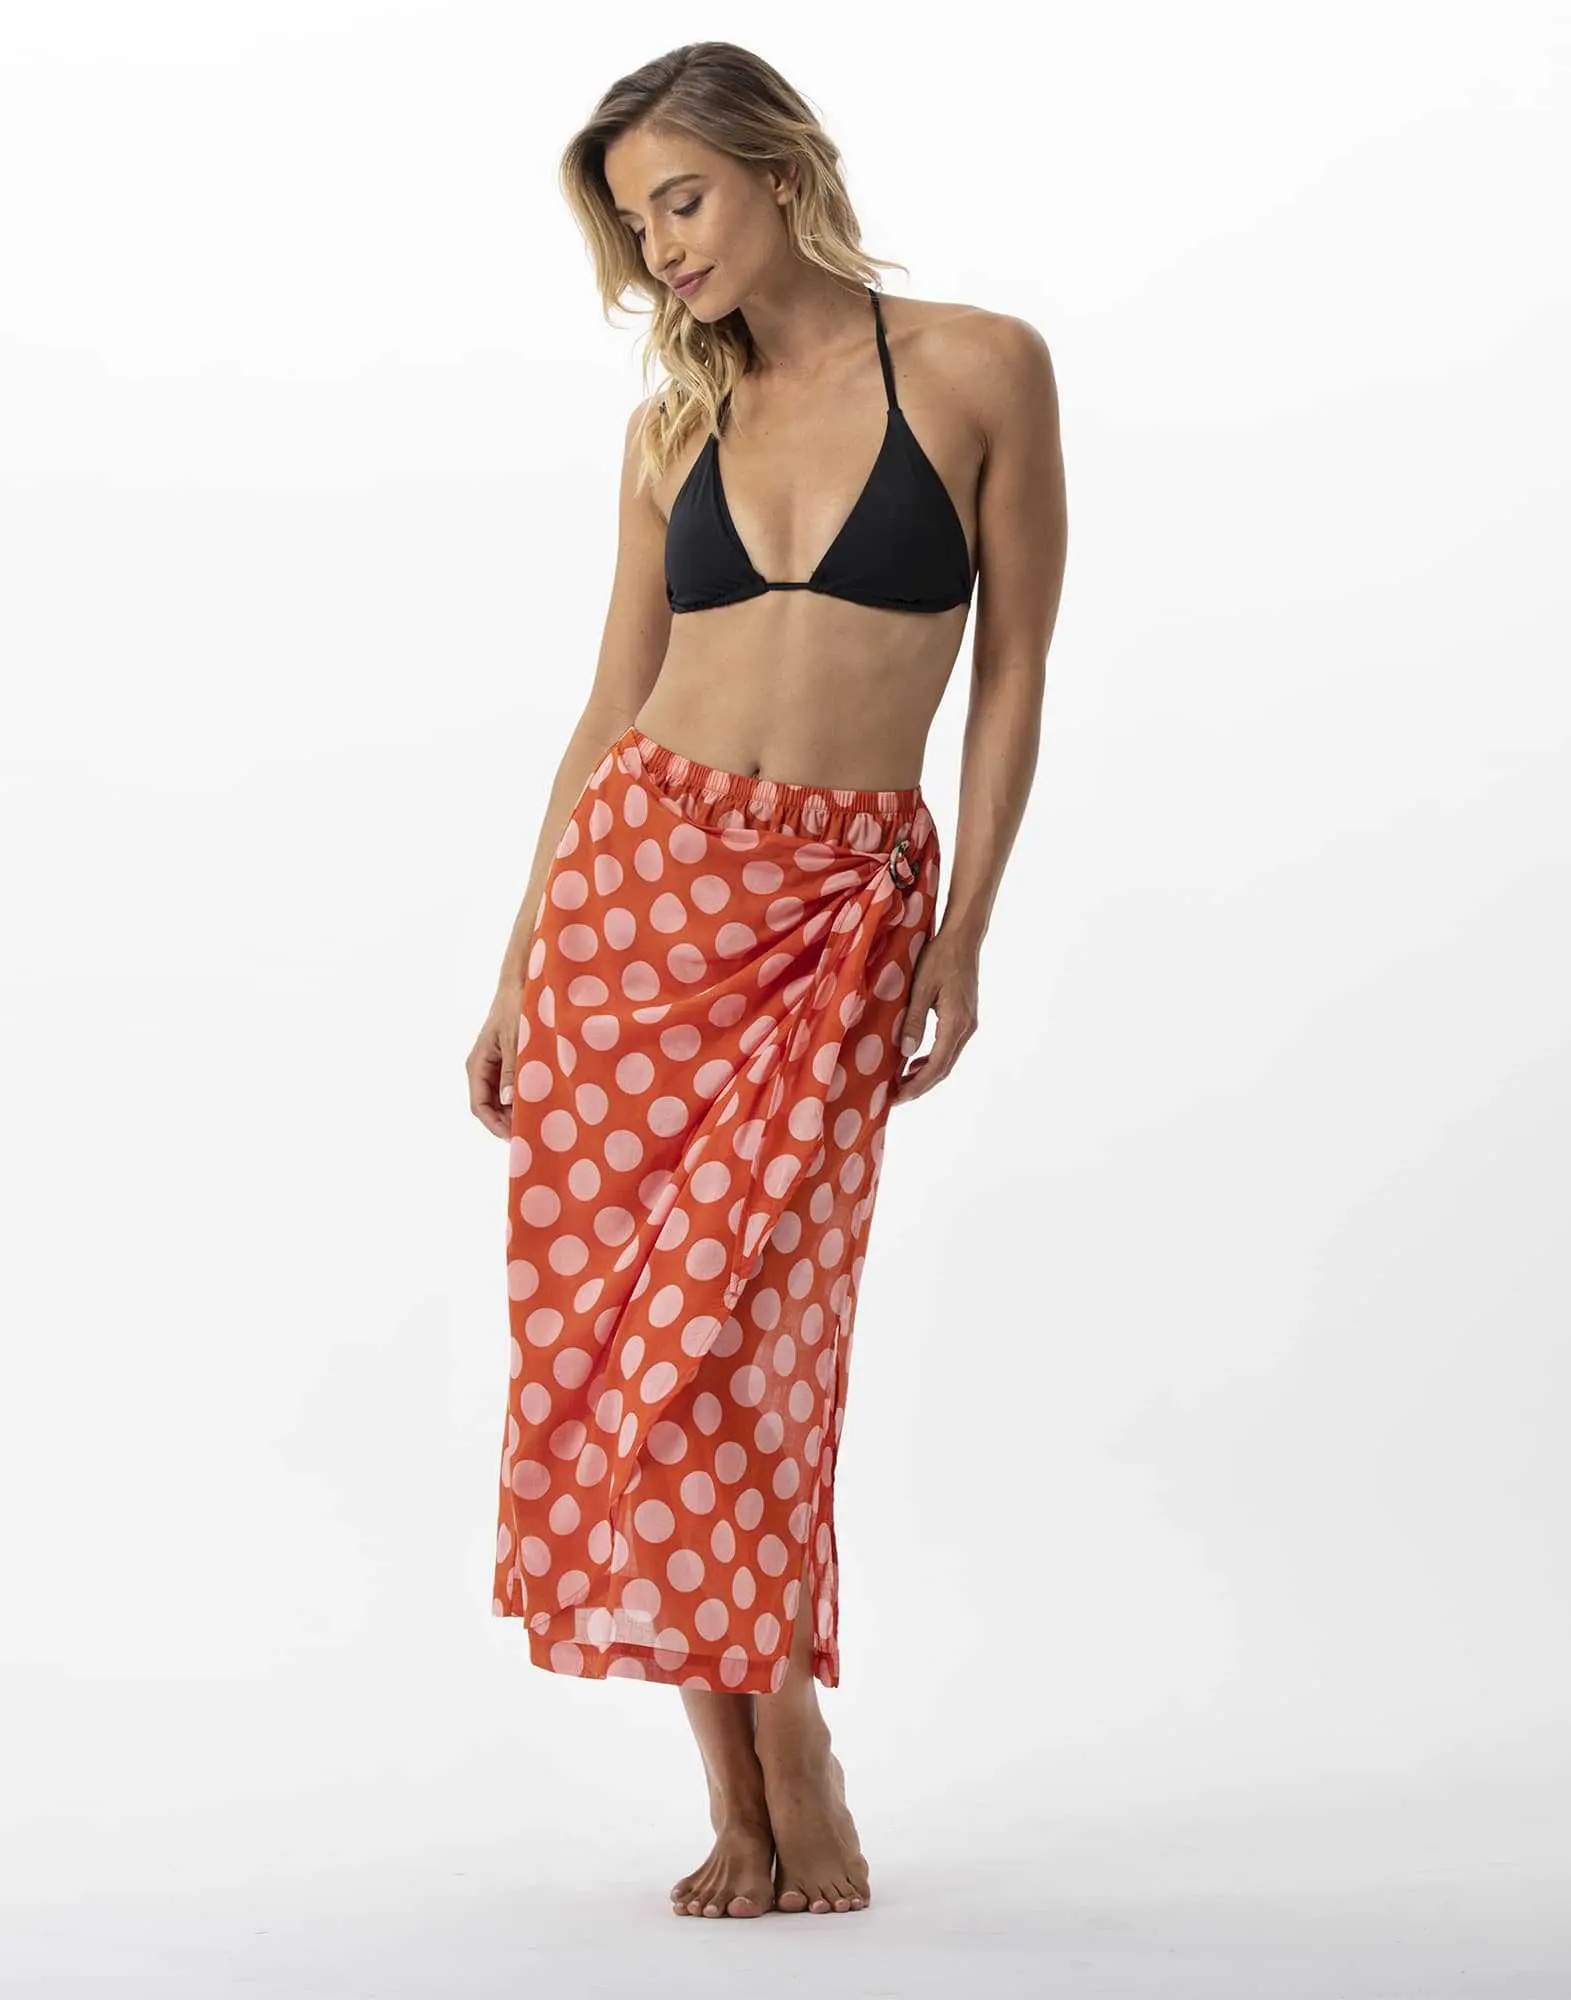 Polka dot printed sarong skirt in 100% cotton RIVA 780 pink | Lingerie le Chat